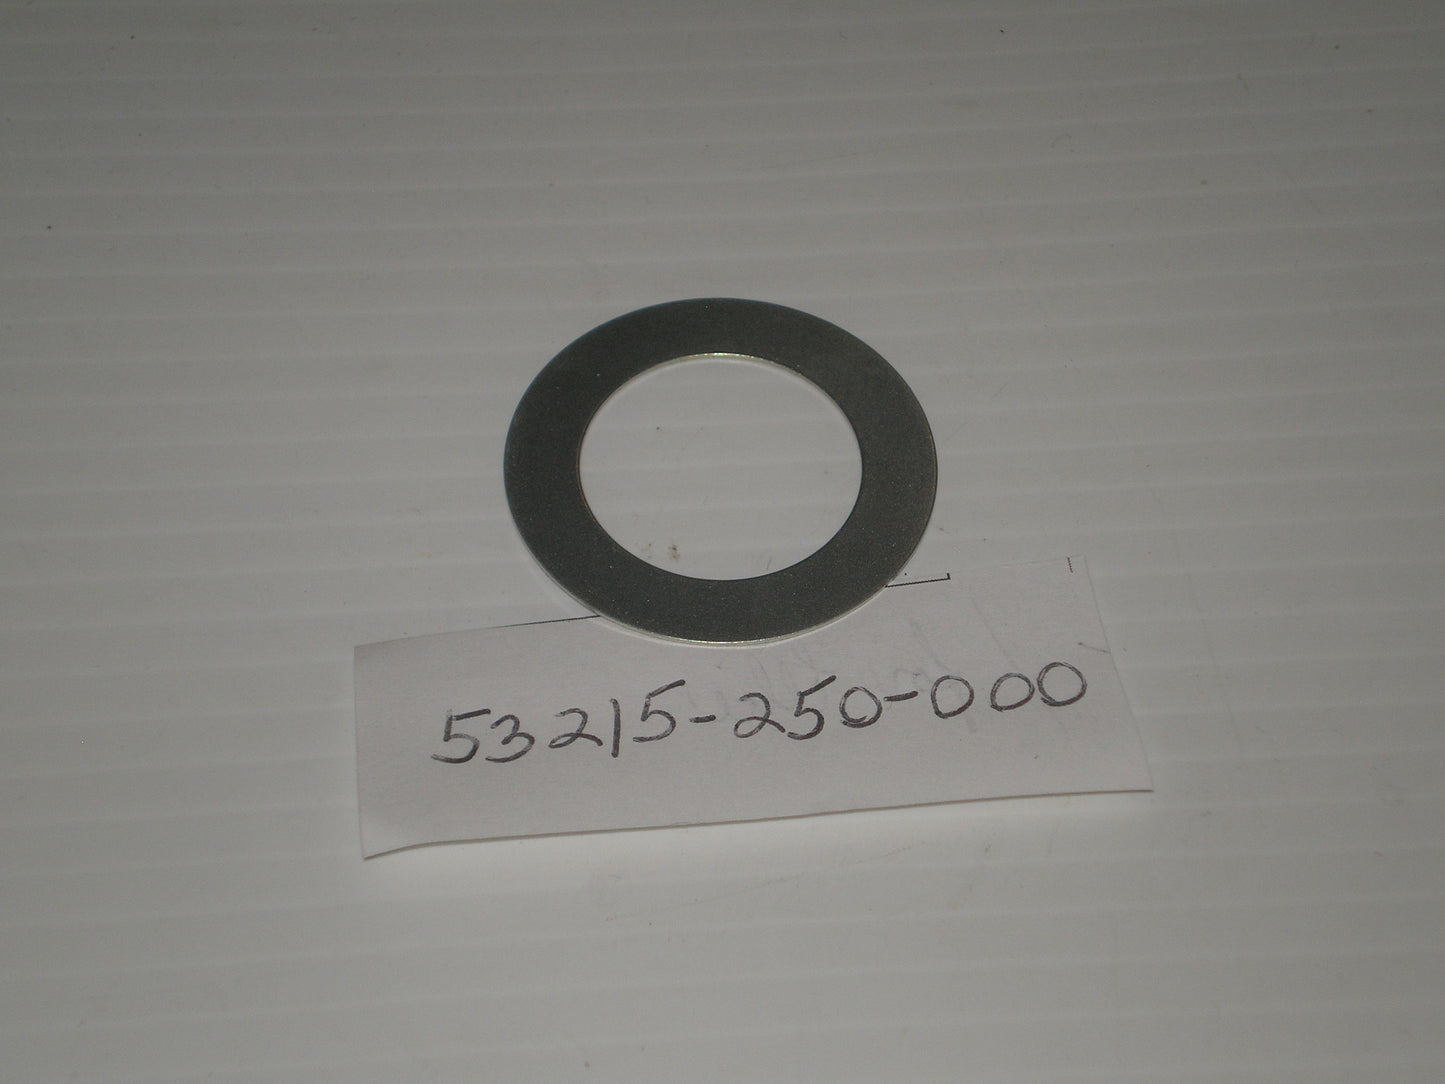 HONDA CA CB CH CJ CL CM CX FT GB GL SL VT VTR  Steering Bearing Dust Seal Washer 53215-250-000